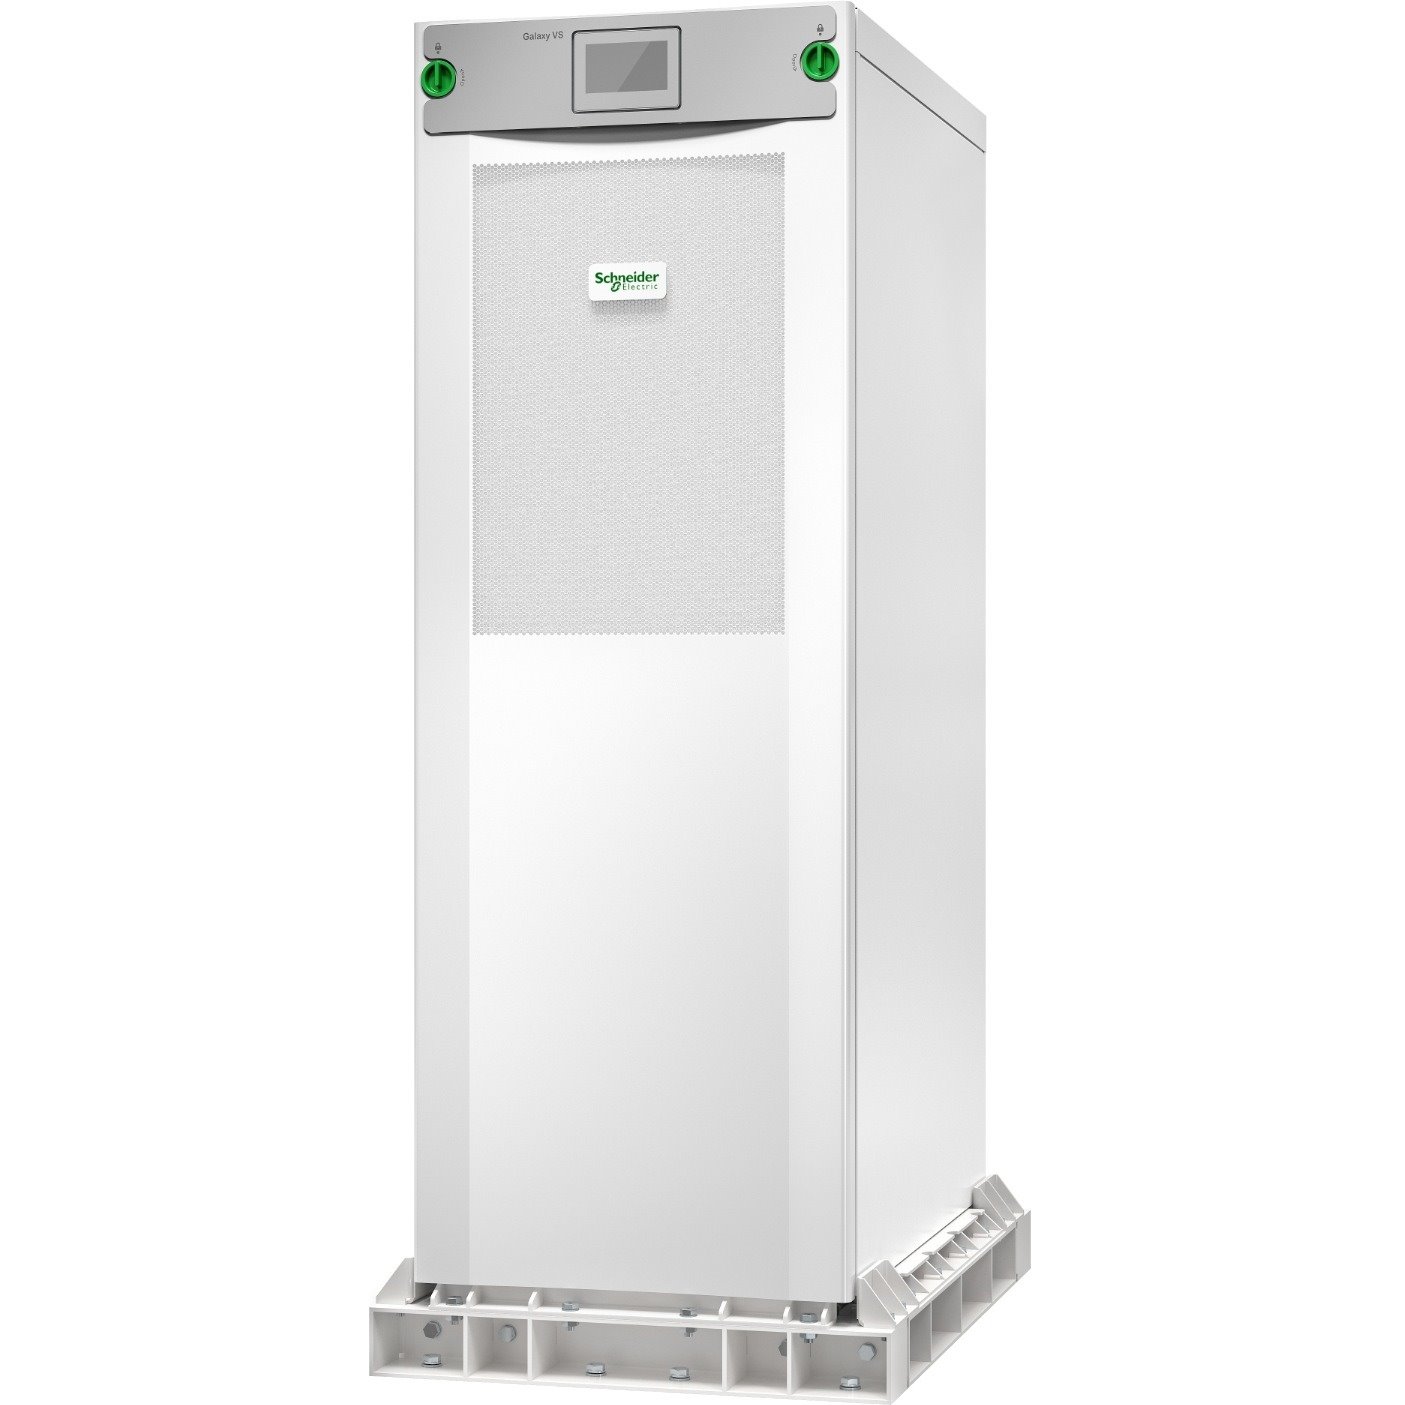 APC by Schneider Electric Galaxy VS Double Conversion Online UPS - 20 kVA/20 kW - Three Phase